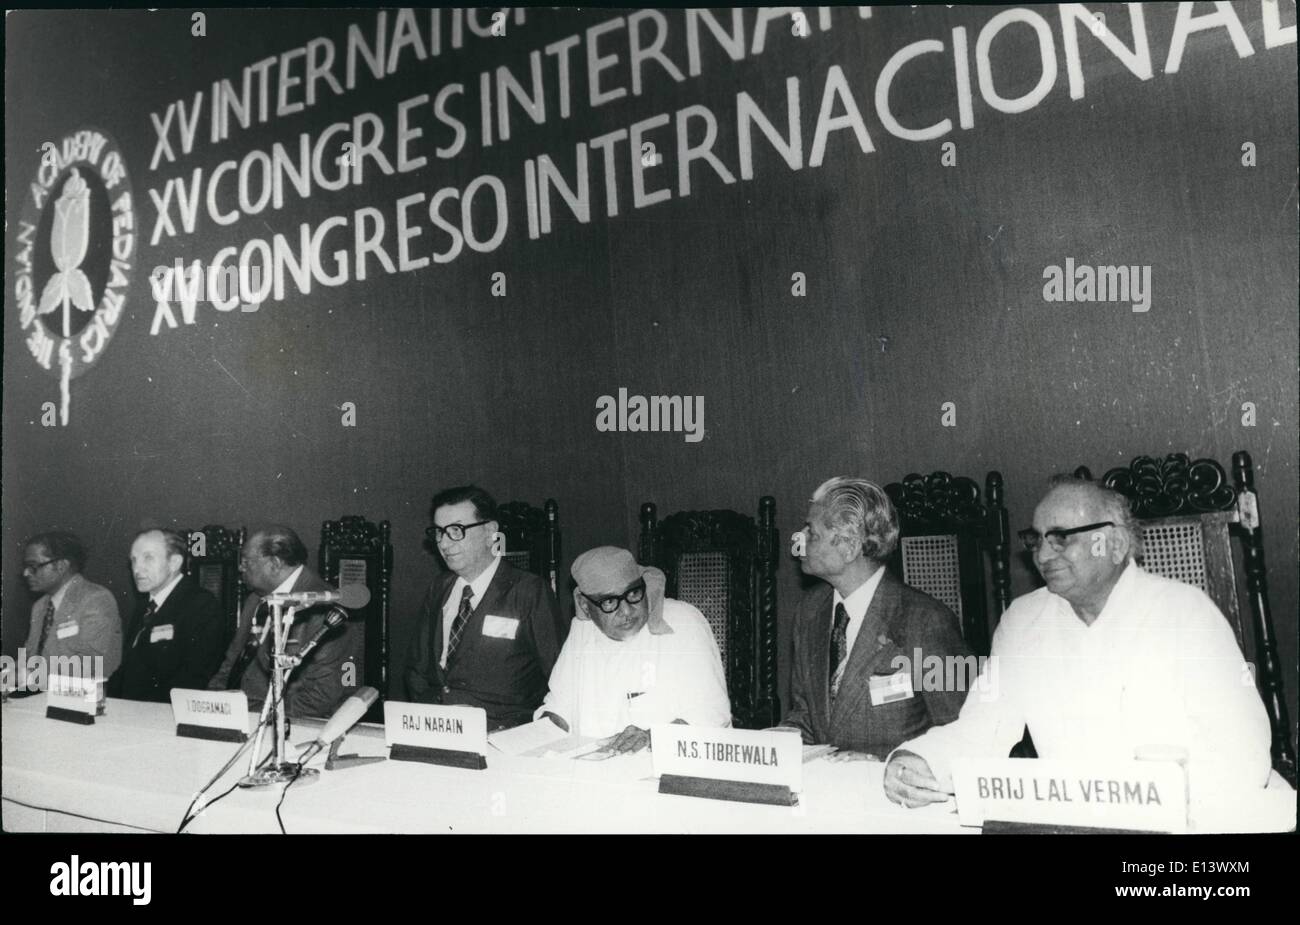 Mar. 27, 2012 - XV international Congress of Pediatrics was inaugurated by union Health Minister Mr. Raj Narain at indoor Stadium at Talkatora Gardens in New Delhi on Sunday - October 23, 1977. Our picture shows Mr. Raj Narain (3rd from right) Union Communication minister Mr. Brijlal Verma (extreme right) and Dr. Iran Dogramaci (4th from right) President of the International Pediaatrics Association. Stock Photo